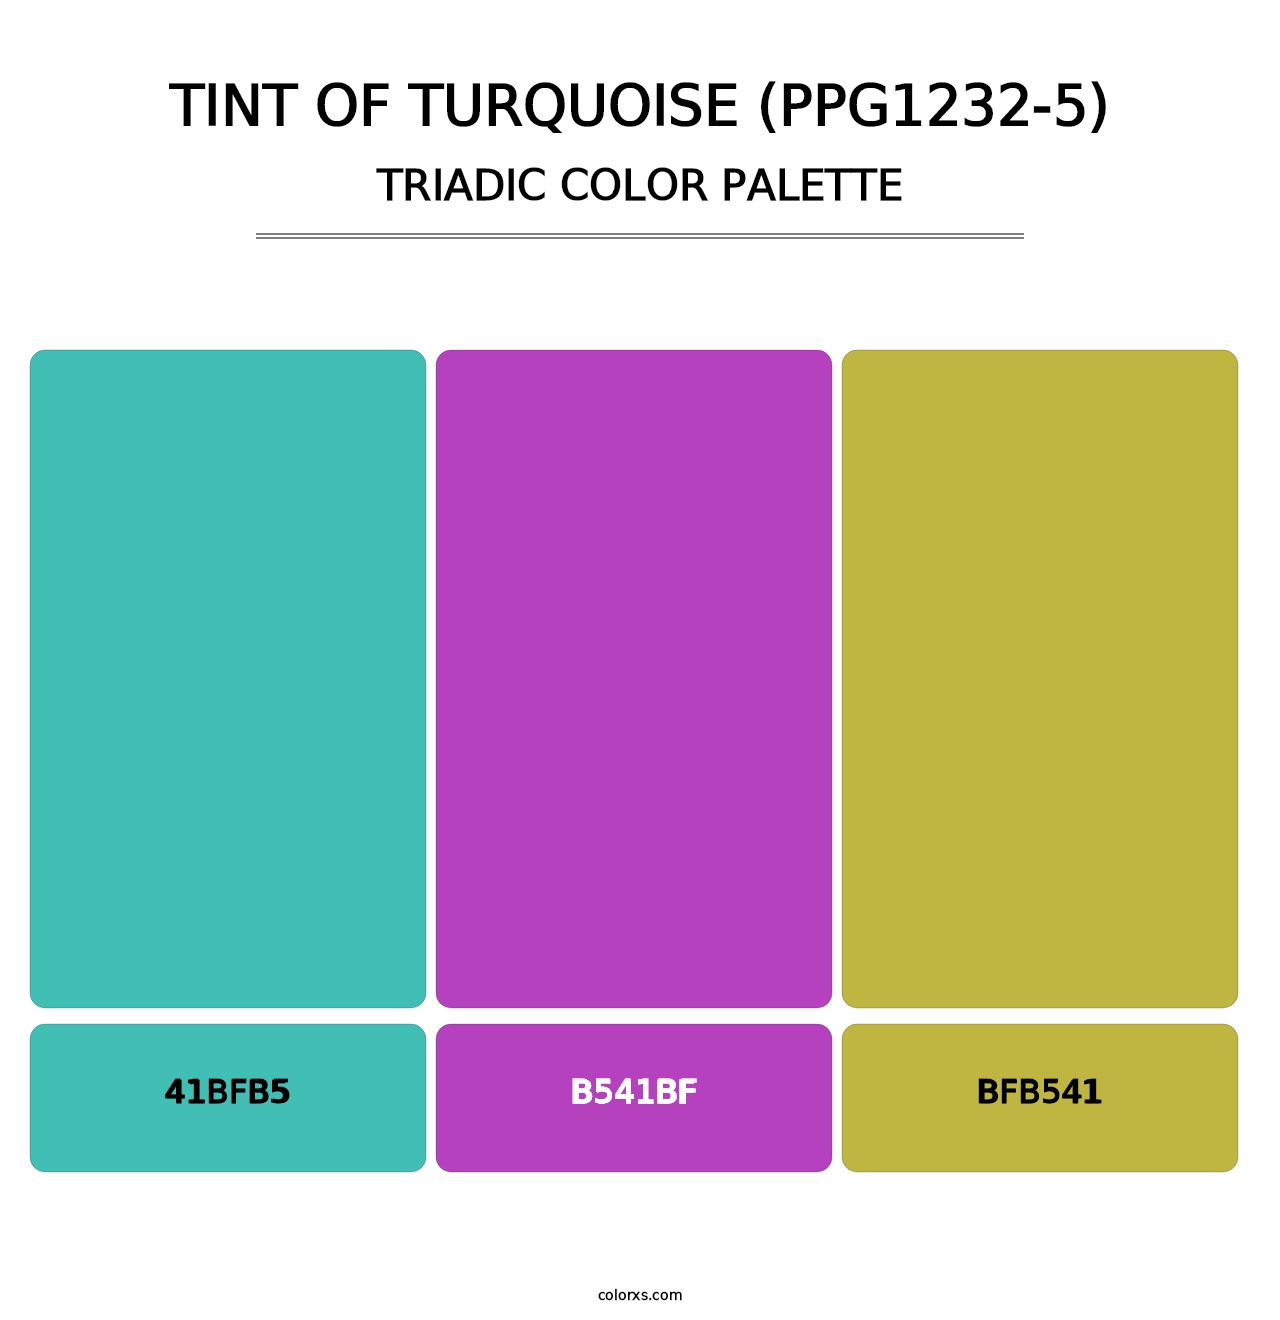 Tint Of Turquoise (PPG1232-5) - Triadic Color Palette